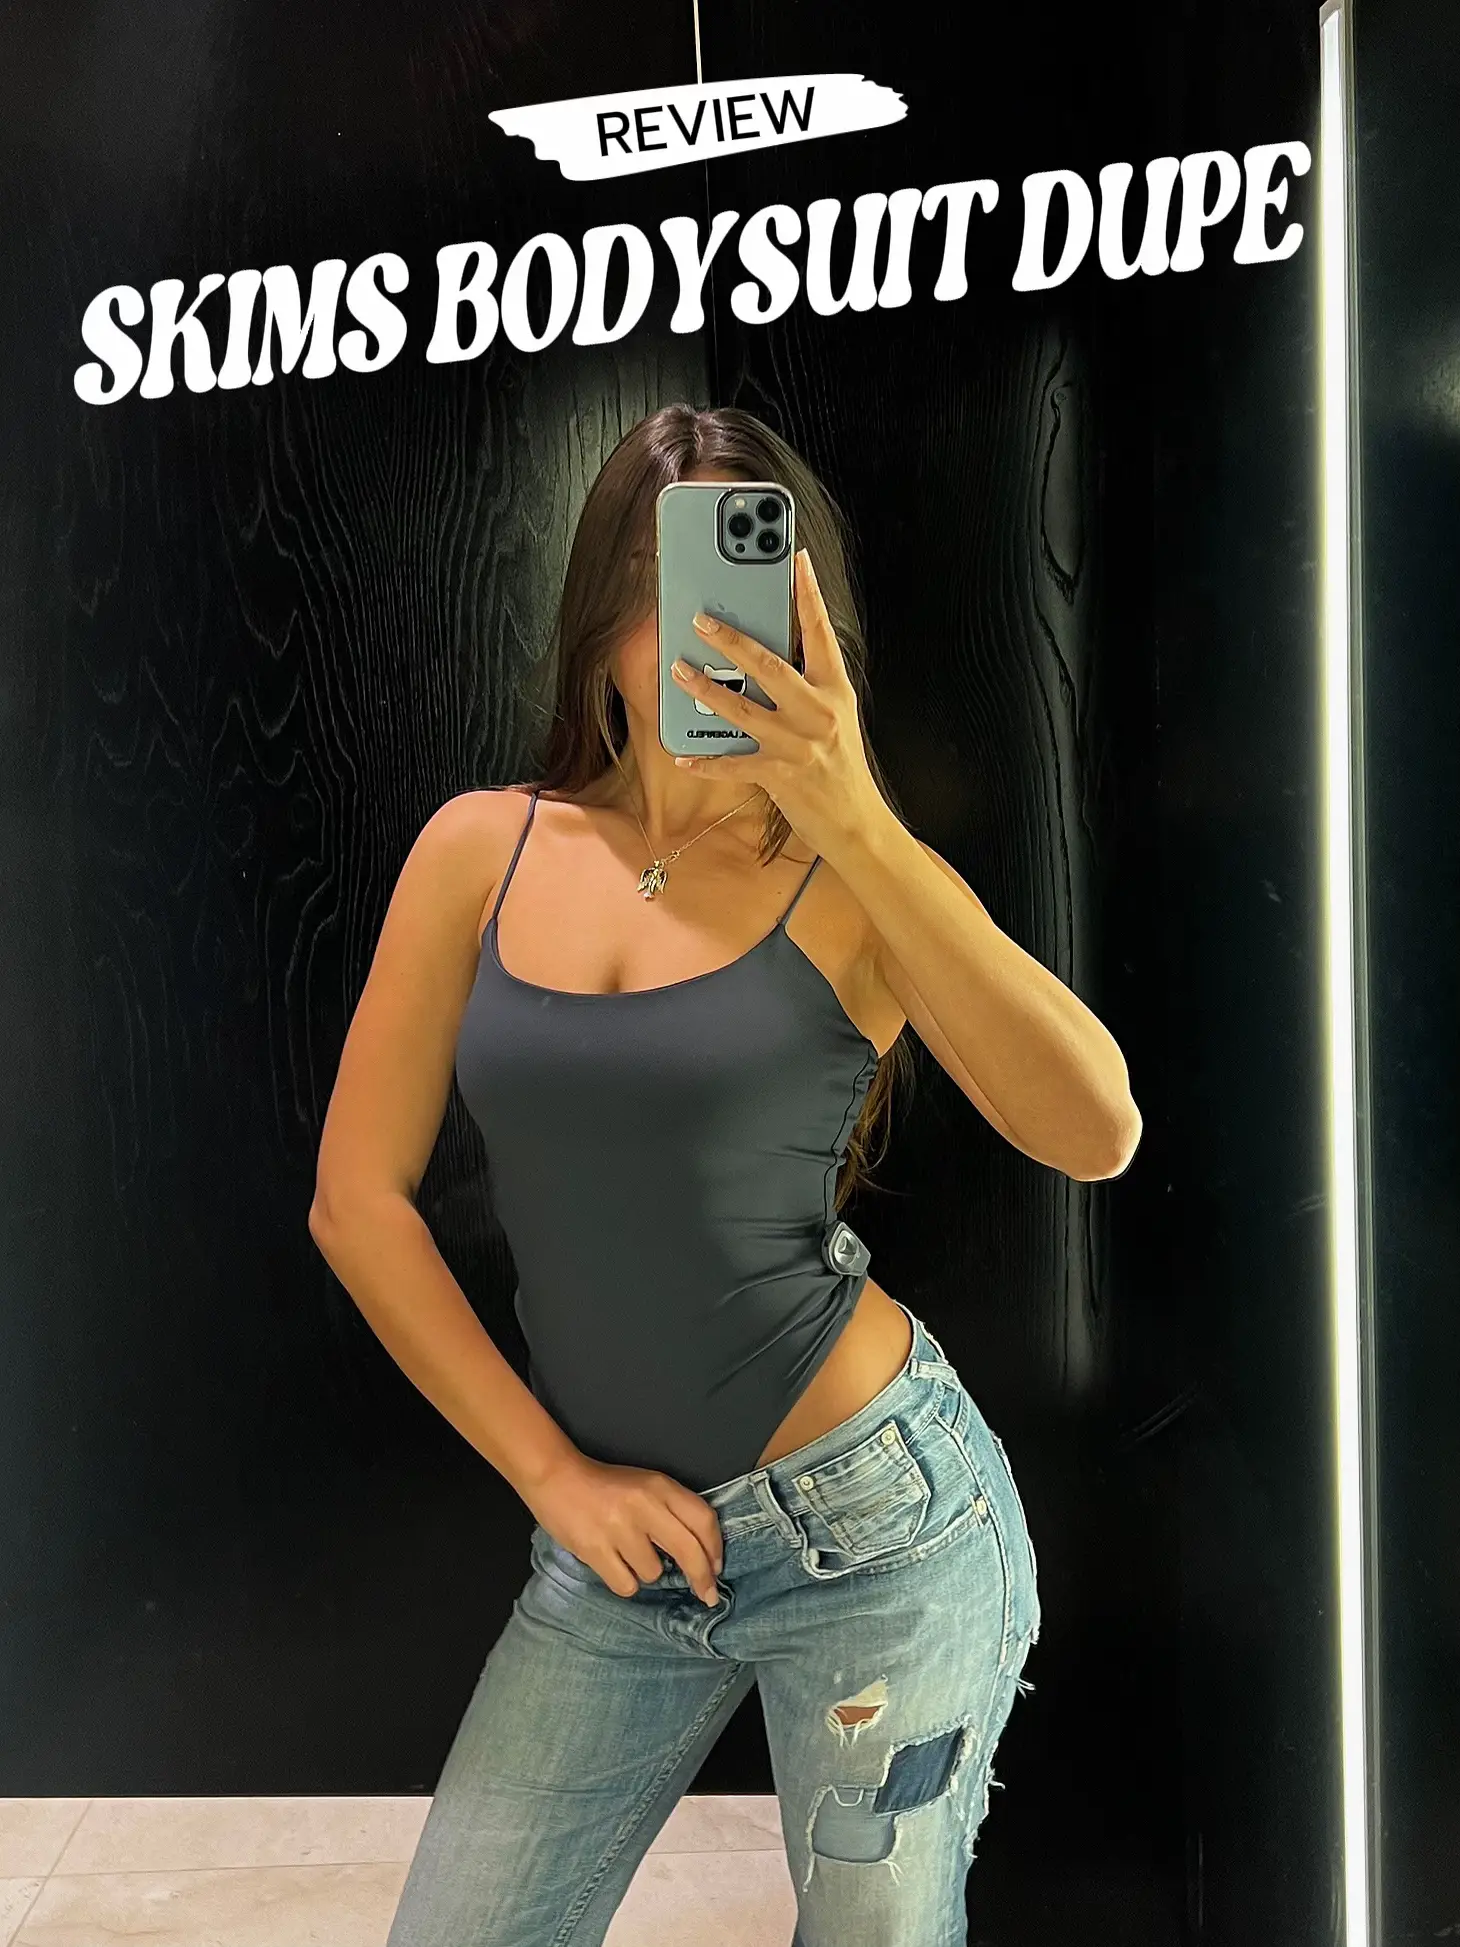 Best skims bodysuit dupe on ! You know where the link is! Code 1